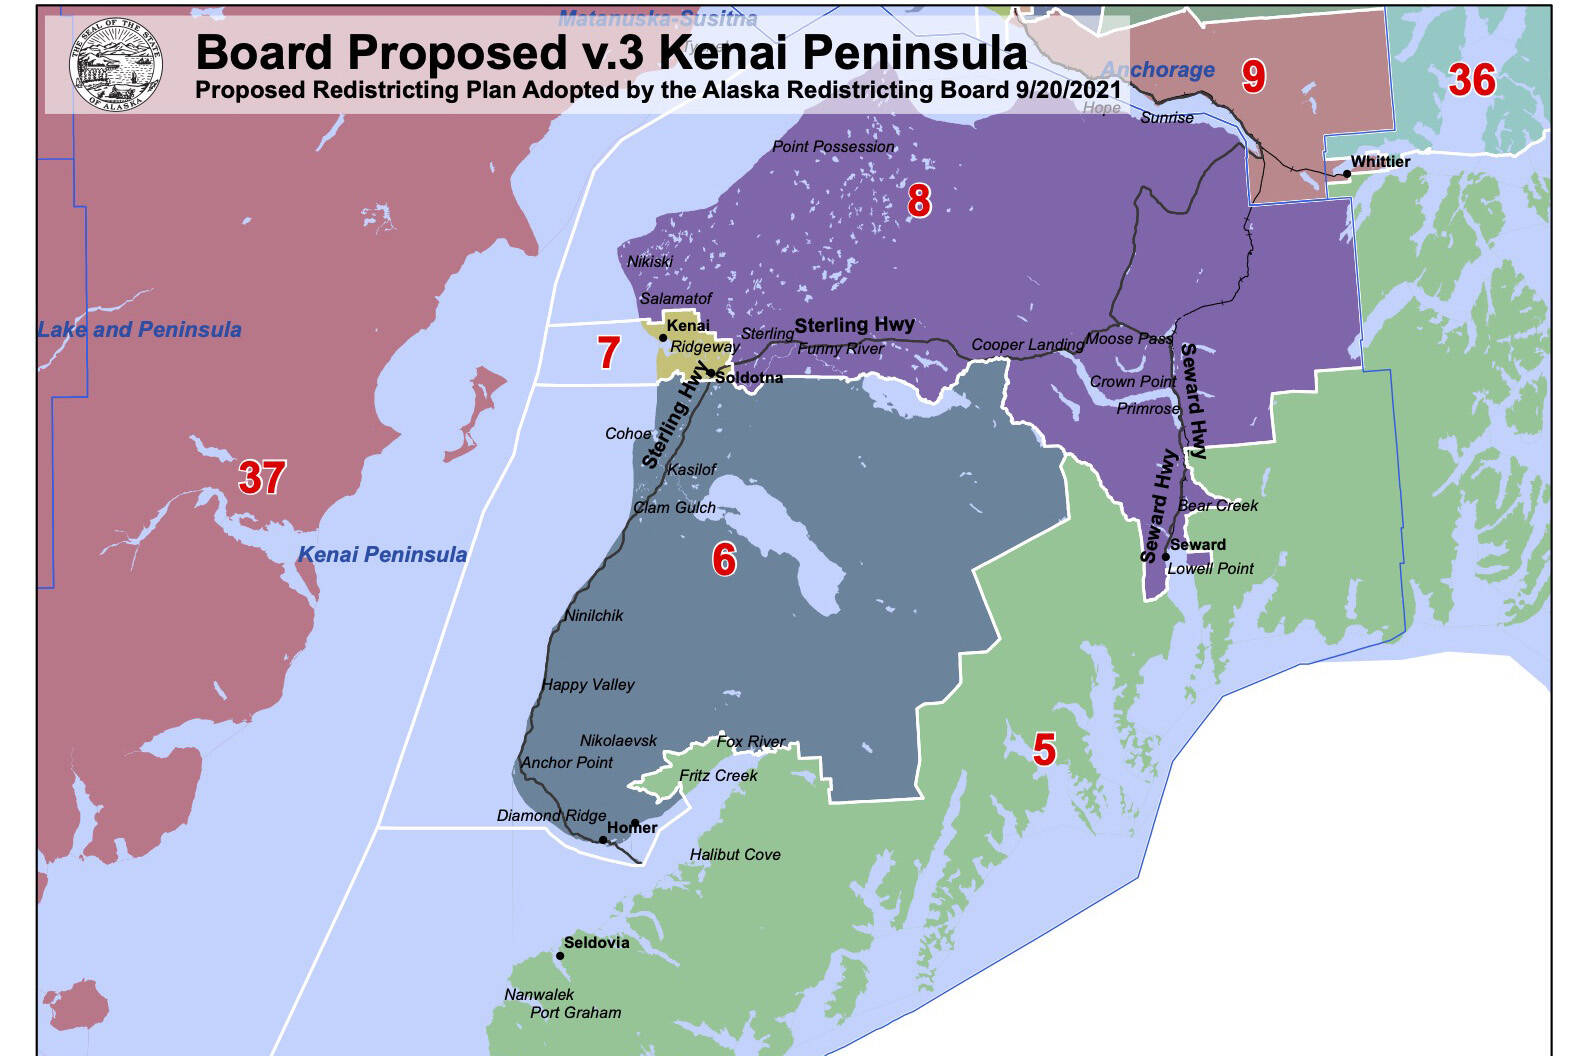 Version 3 of the Alaska Redistricting Board’s proposal for the Kenai Peninsula keeps intact most of District 31, now called District 6, but puts the Fritz Creek and Fox River areas into a new District 5 that includes the southern shore of Kachemak Bay and Kodiak Island. (Photo courtesy of Alaska Redistricting Board)